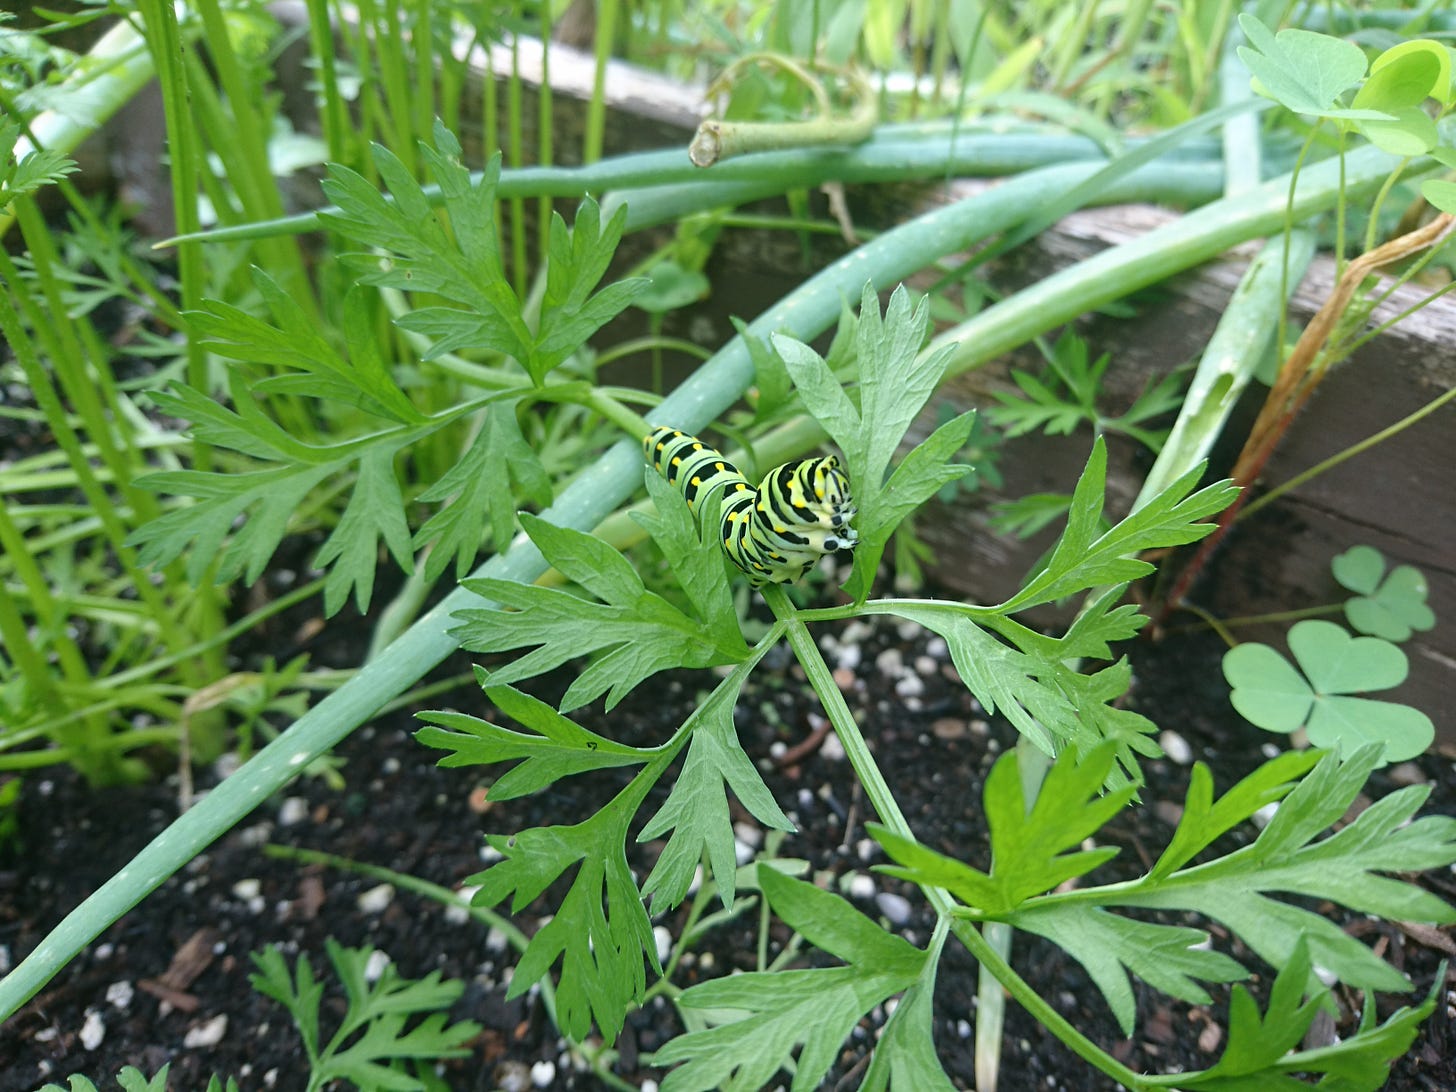 A black swallowtail caterpillar sits half reared on a carrot stalk, hidin it's face behind a leaf